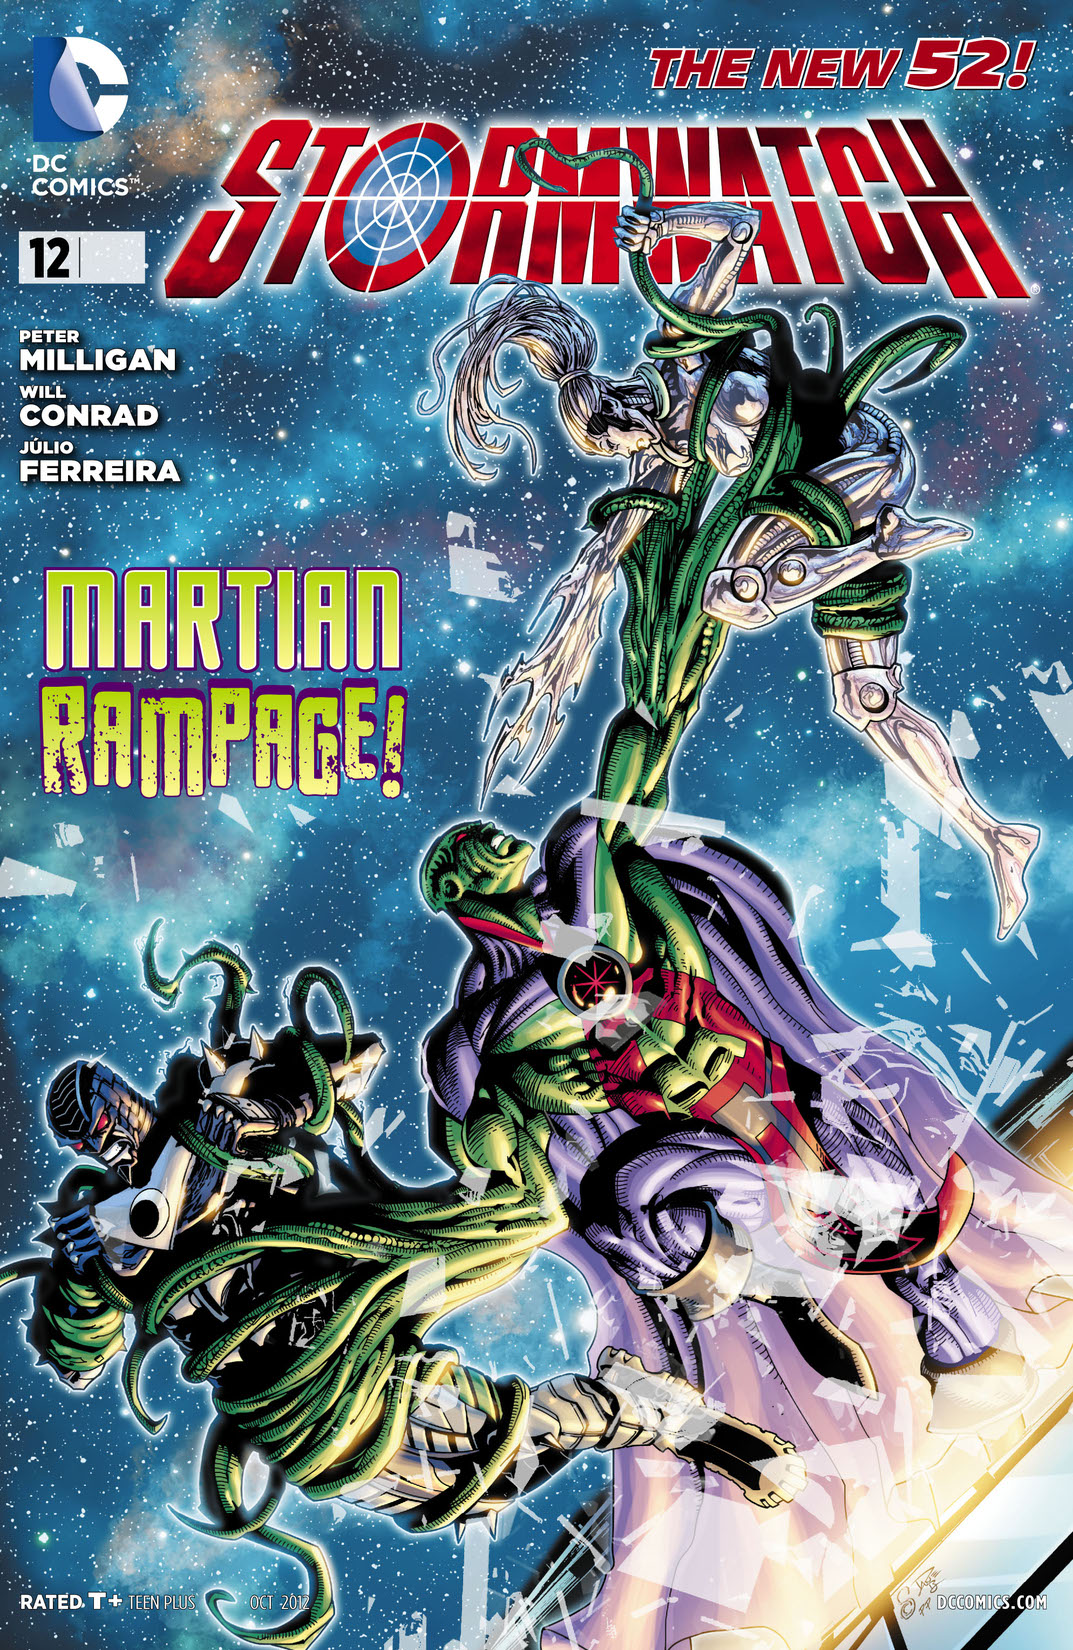 Stormwatch (2011-) #12 preview images